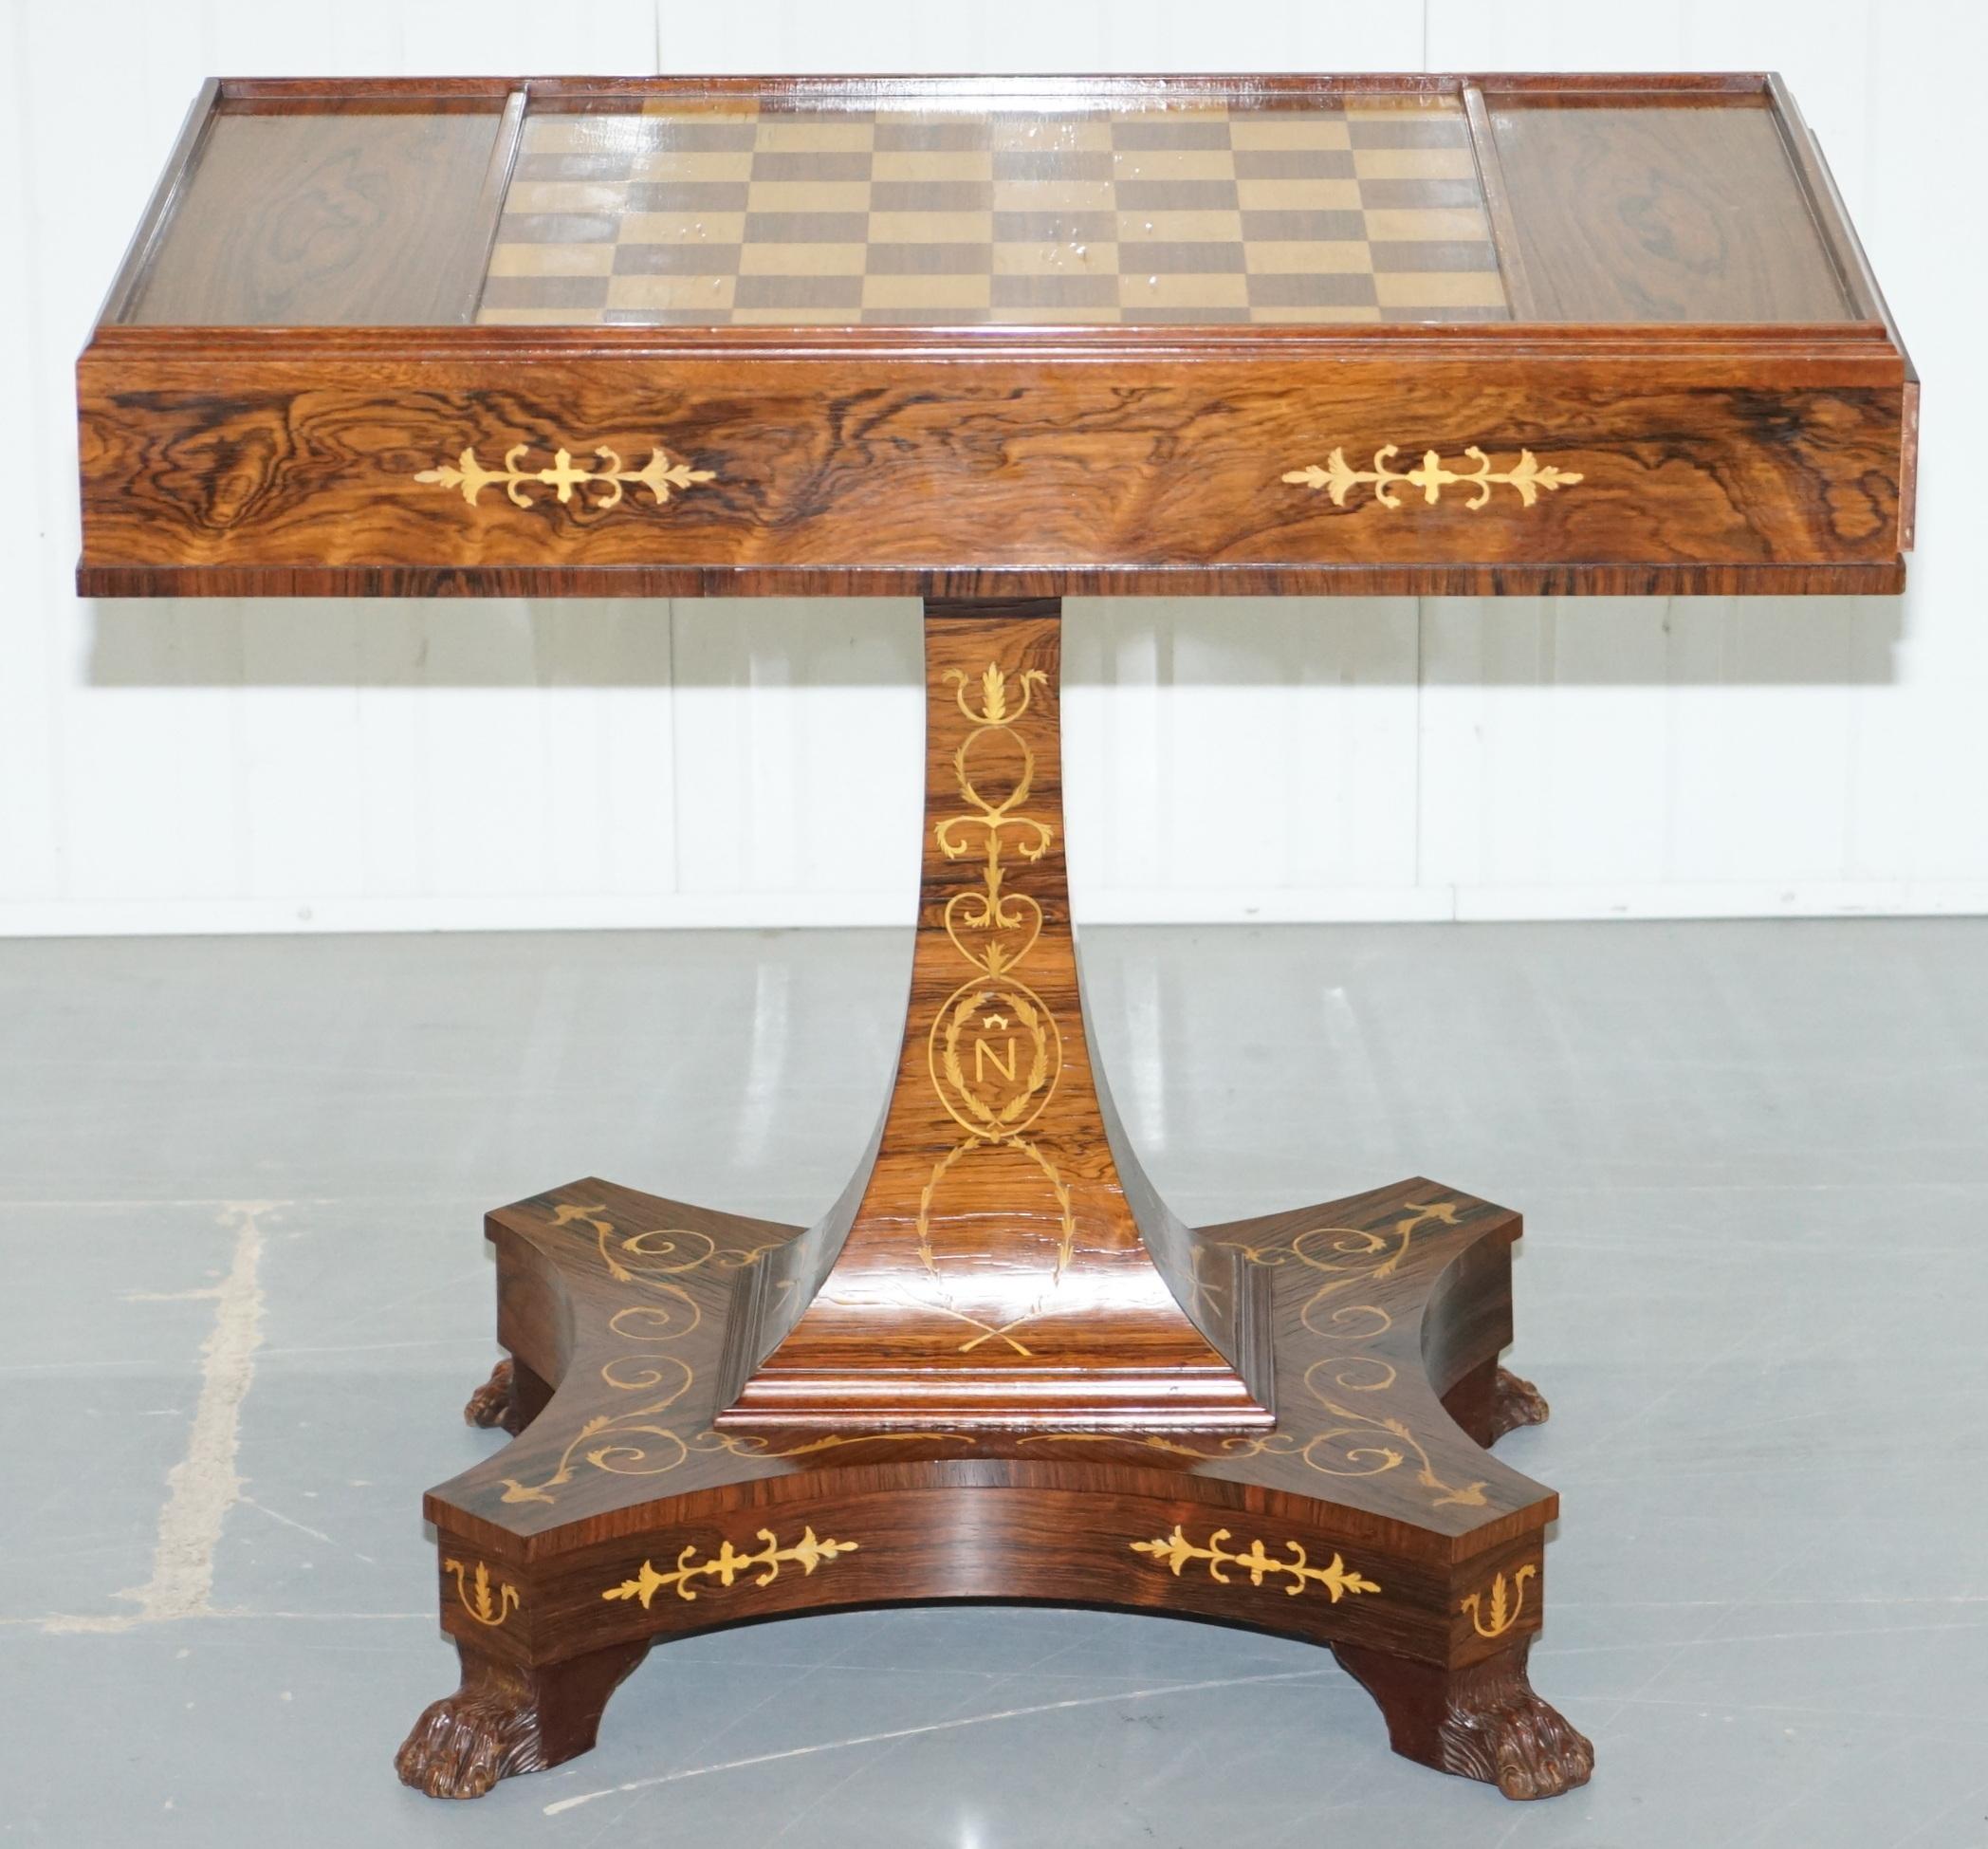 We are delighted to offer for sale this very rare games table with the N for Napoleon Bonaparte below the crown, attributed to designs by Carlo Beccalli and made for the Palace of Fontainebleau during Napoleons occupancy

An Empire style rosewood